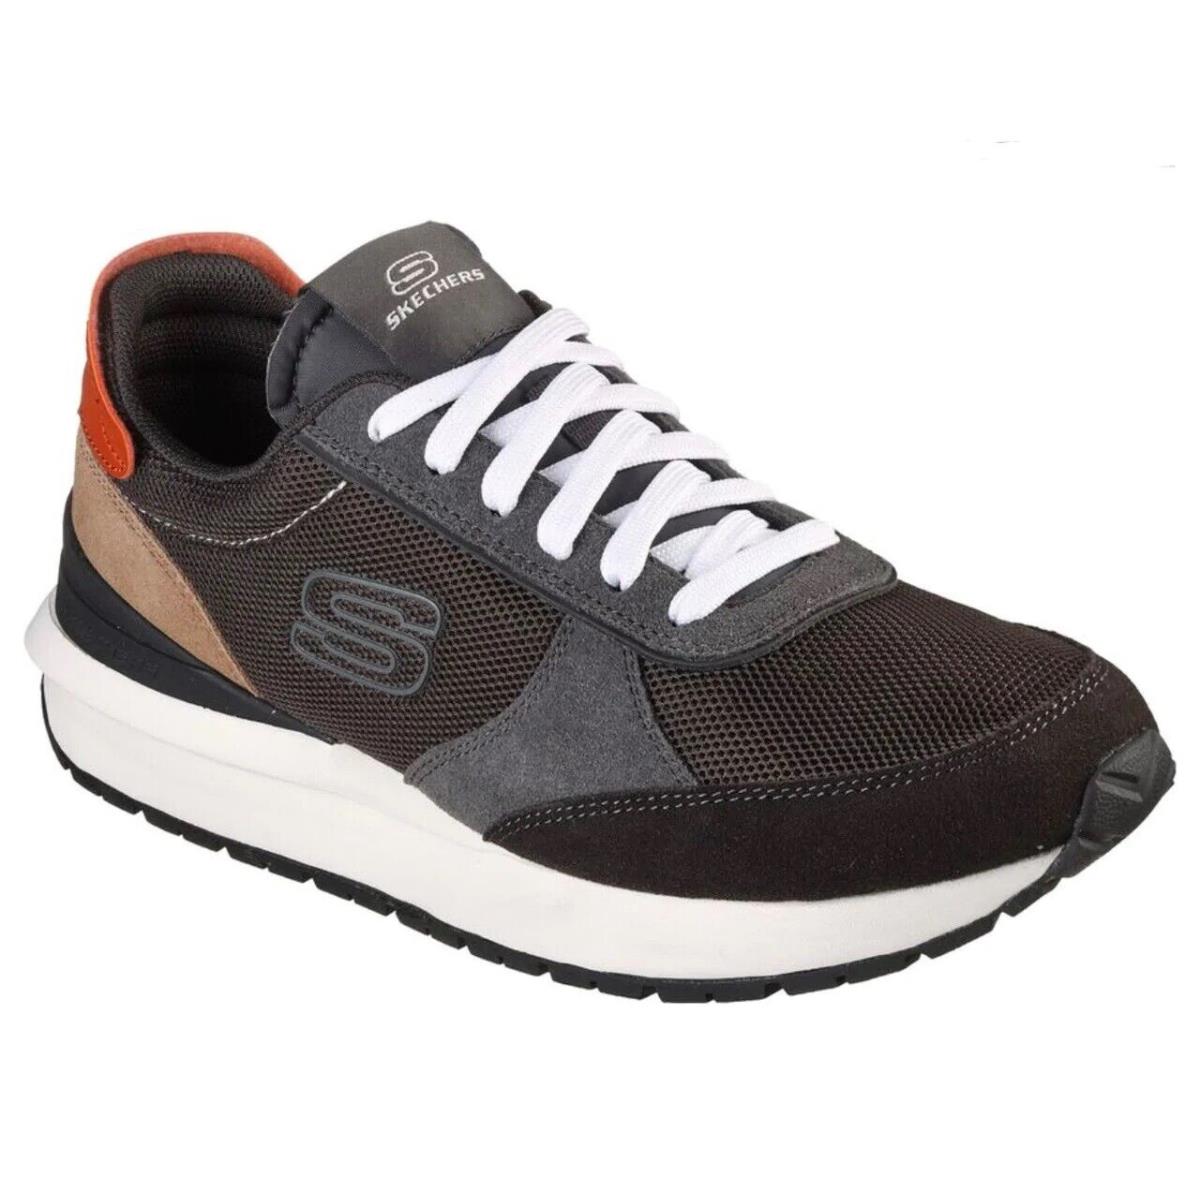 Men`s Skechers Sunny Dale Miyoto Casual Shoes 210437 /ccbk Multi Sizes Charcoal